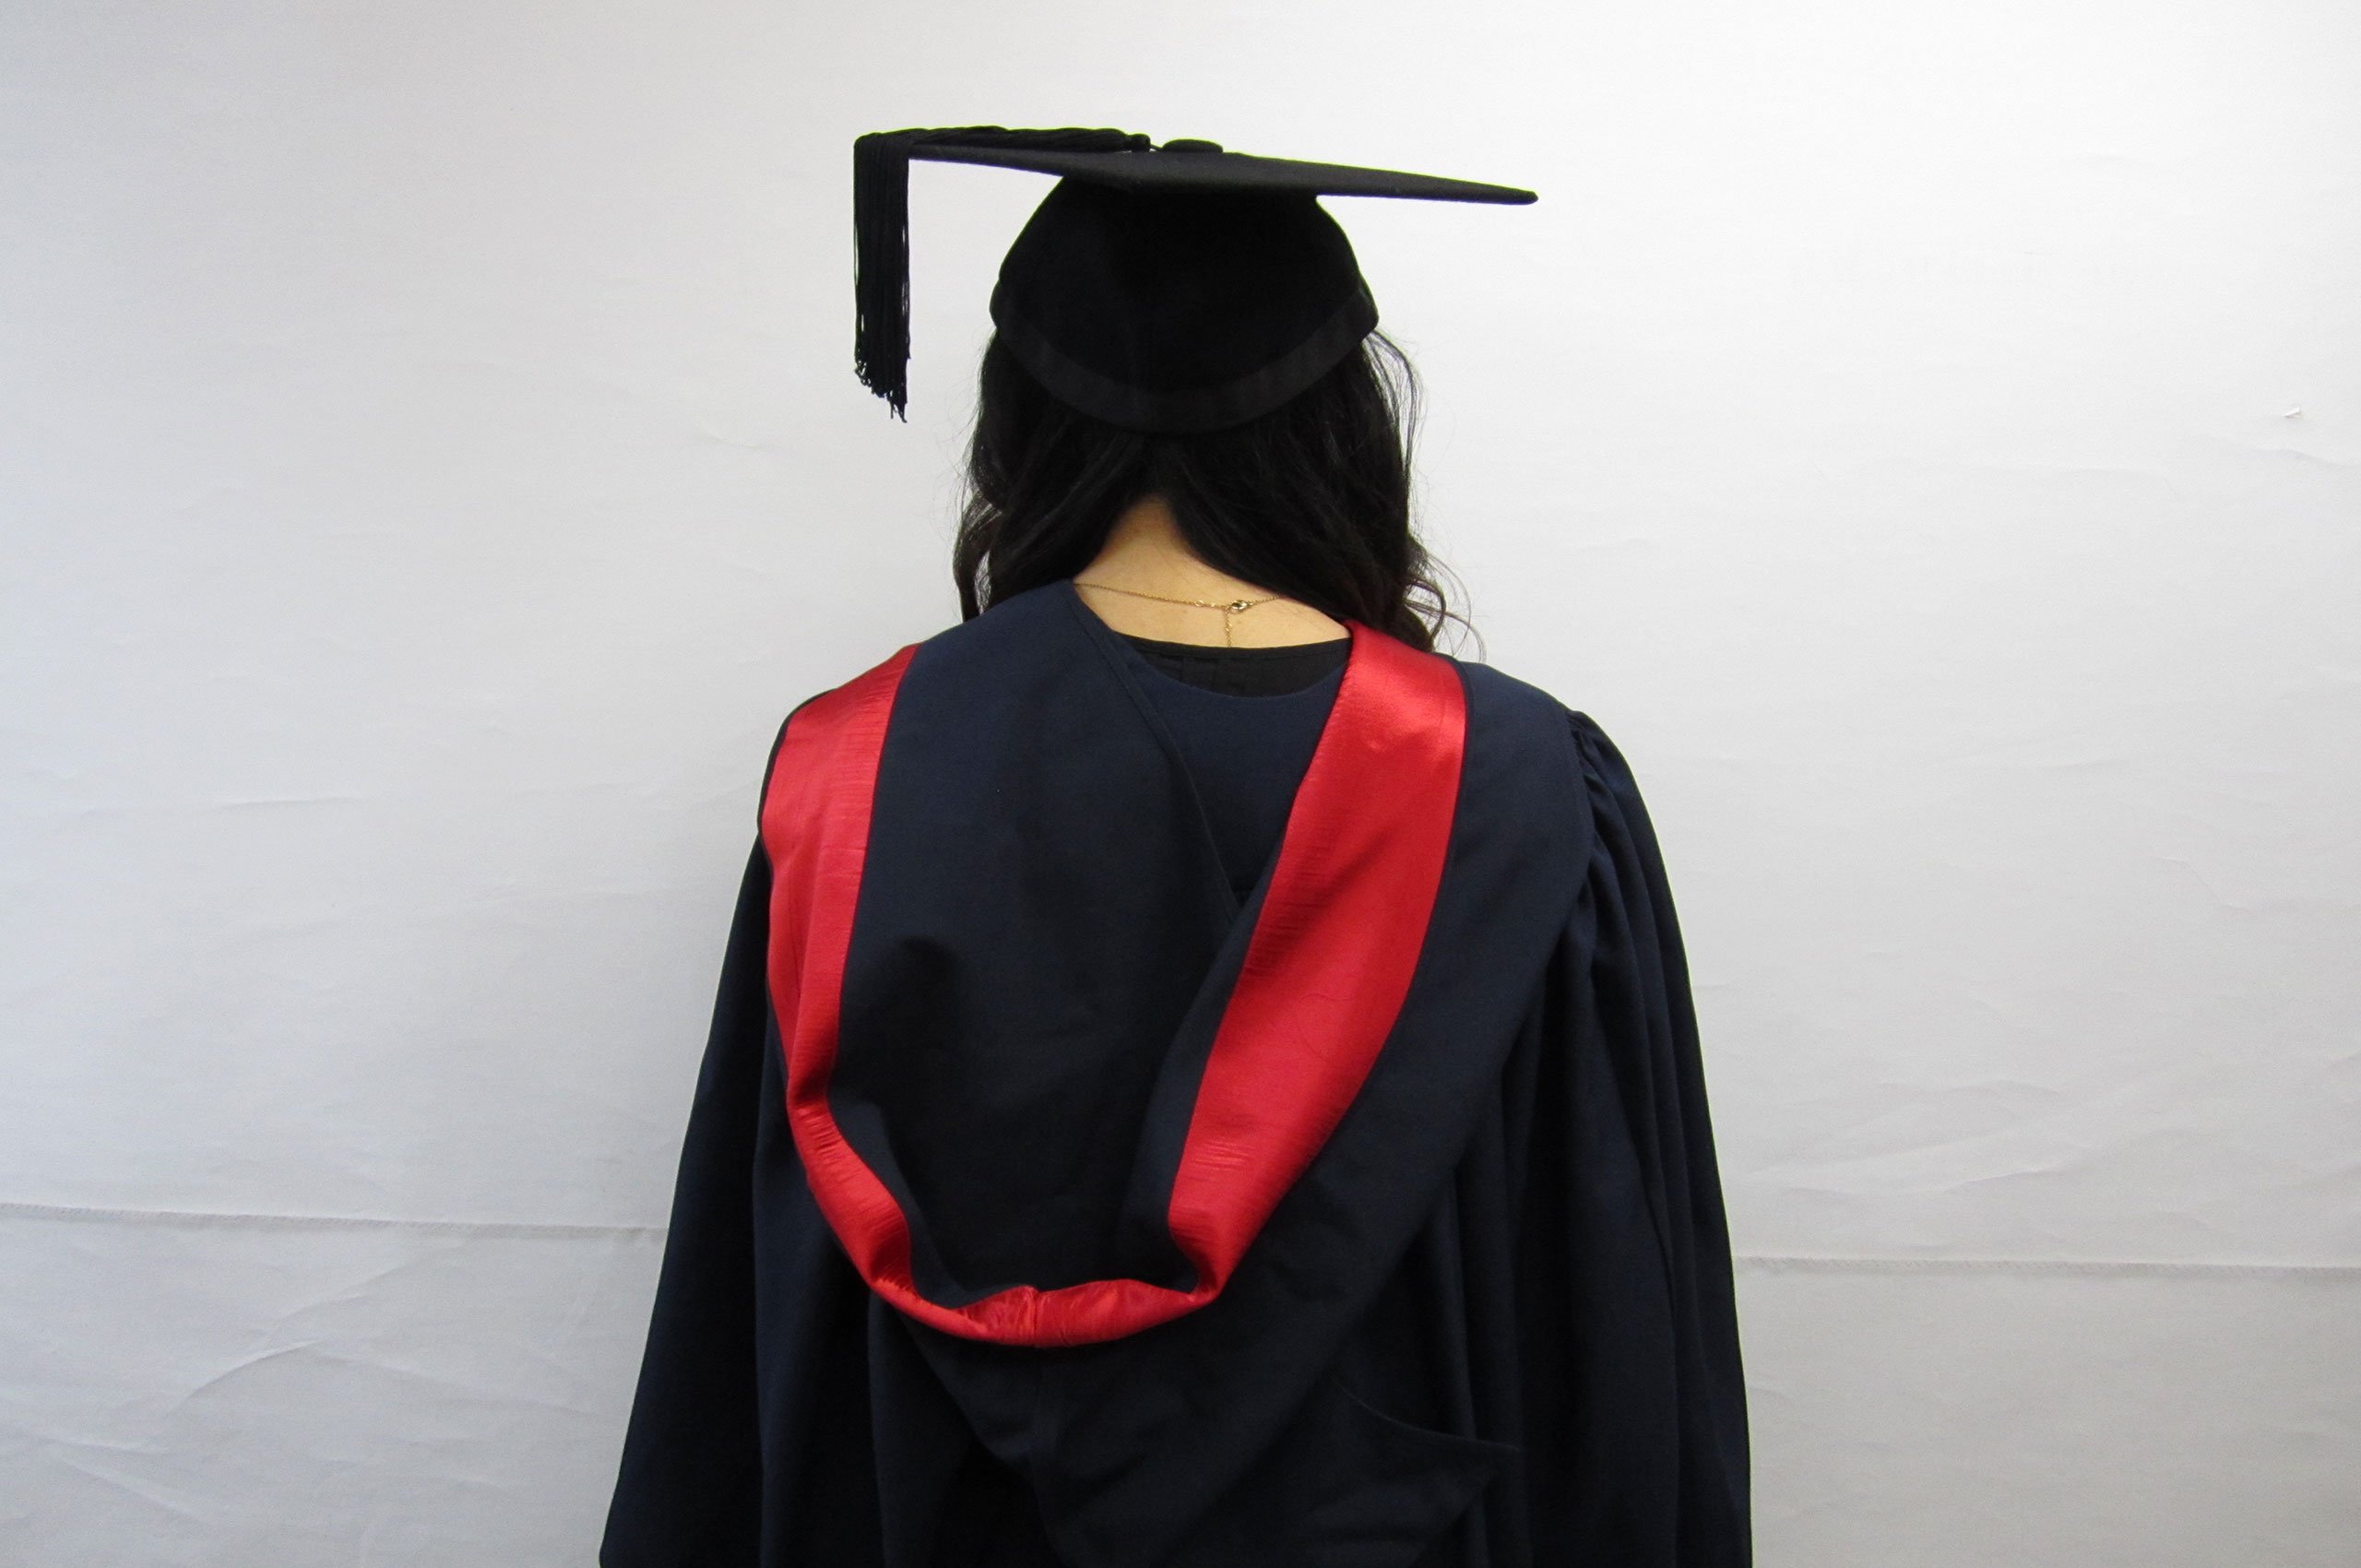 back of bachelor (honours) degree gown, deep red silk sash in hood like shape hanging over back